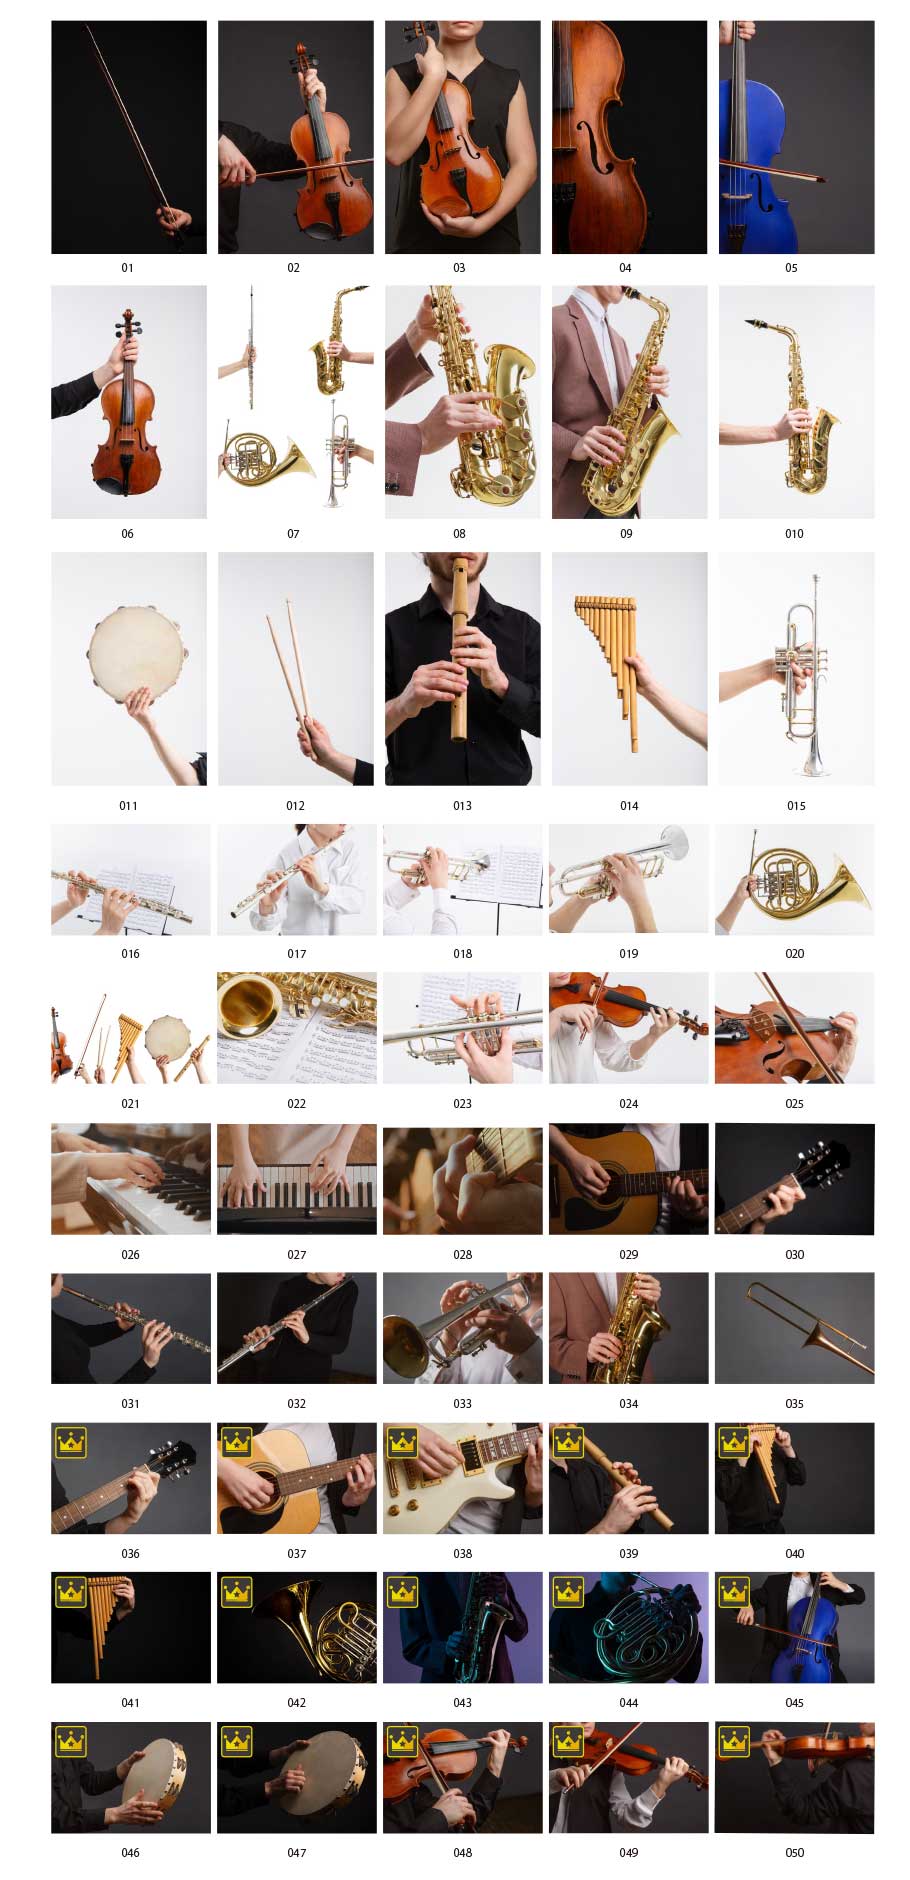 Pictures of various musical instruments